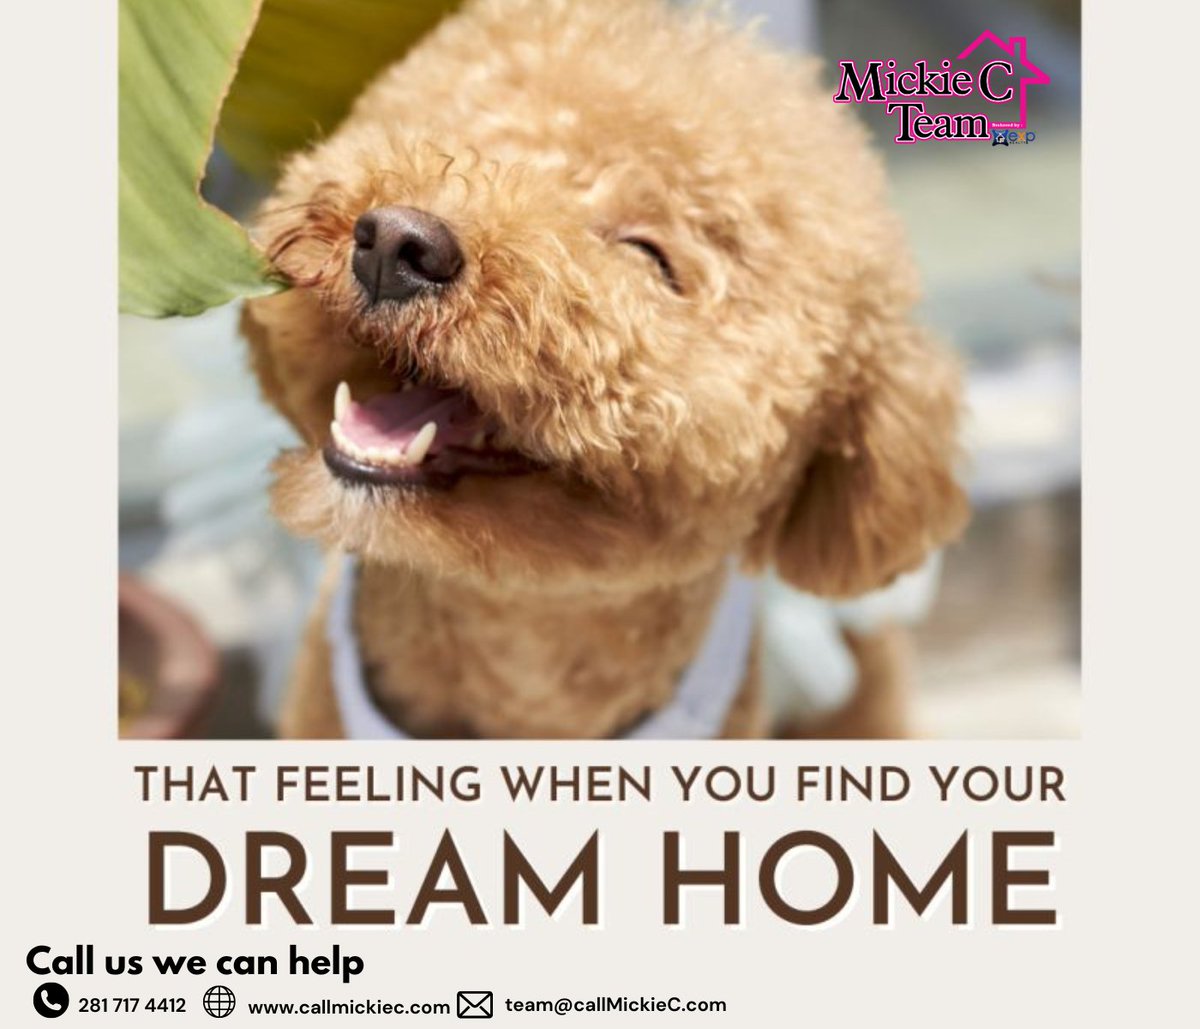 Looking for your dream house? Call us!

Contact us:⁠
281 717 4412⁠
callmickiec.com
team@callmickiec.com
⁠
#texasliving #movetotexasfromcalifornia #relocatetotexas
#Texasyourstate #katytxhouses #texashomesforsale #texasrealty #ilovetexas #texaslife #texasrealestate